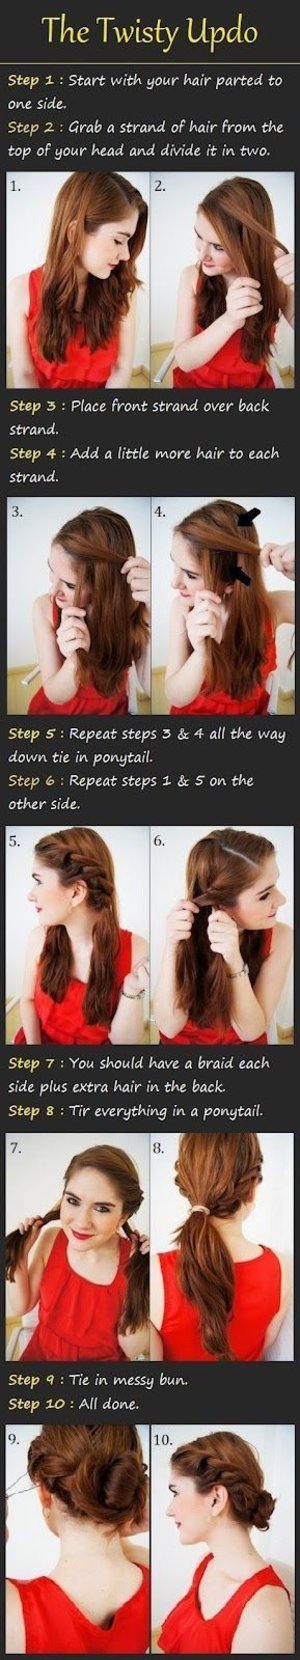 Tutorial twisted updo your hair